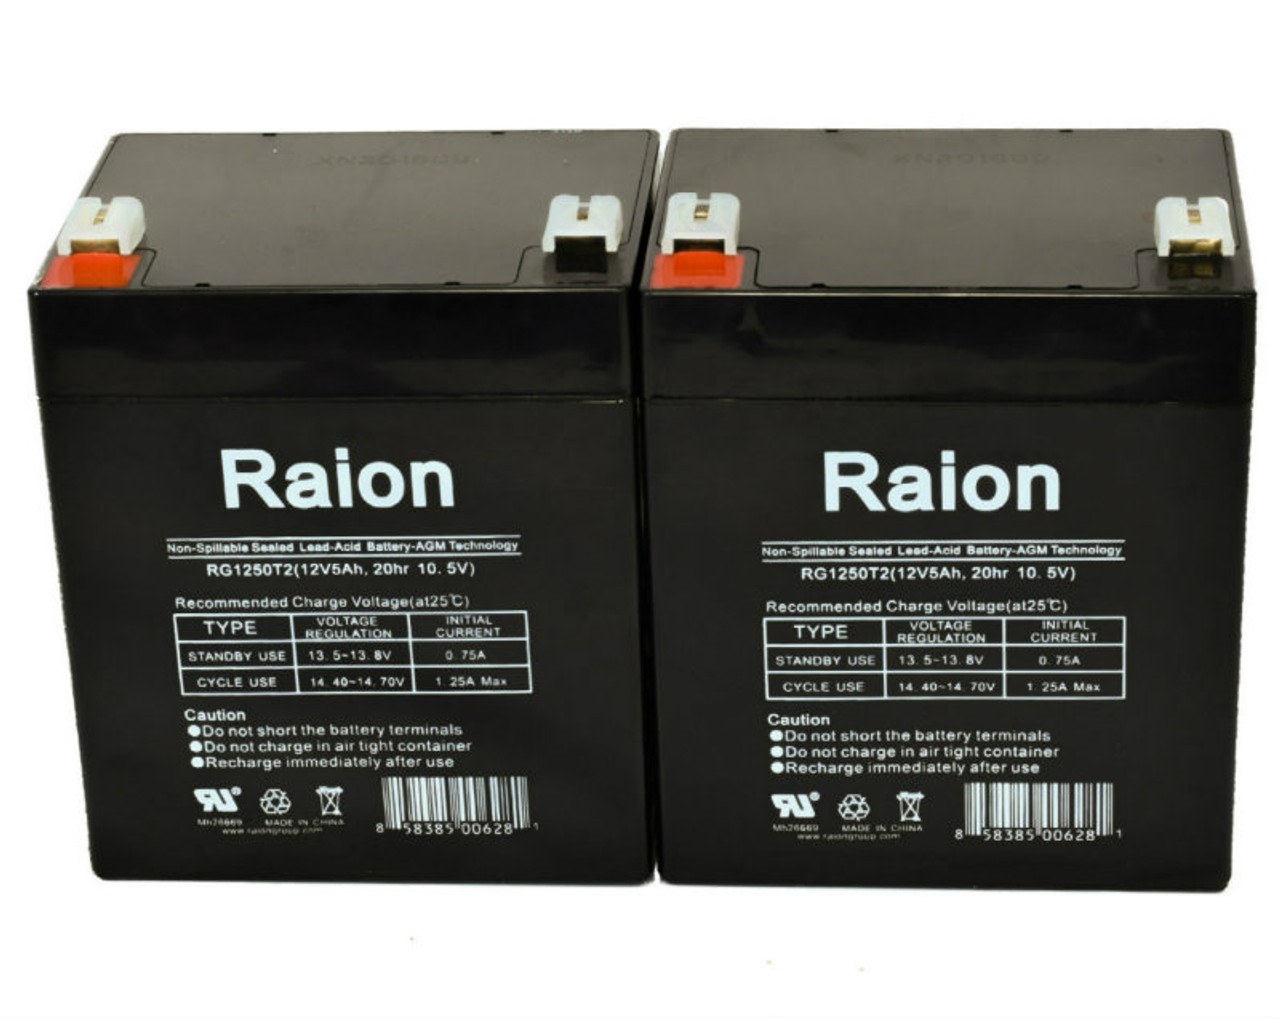 Raion Power RG1250T1 Replacement Fire Alarm Control Panel Battery for ADT Security Alarm Vista 10SE - 2 Pack